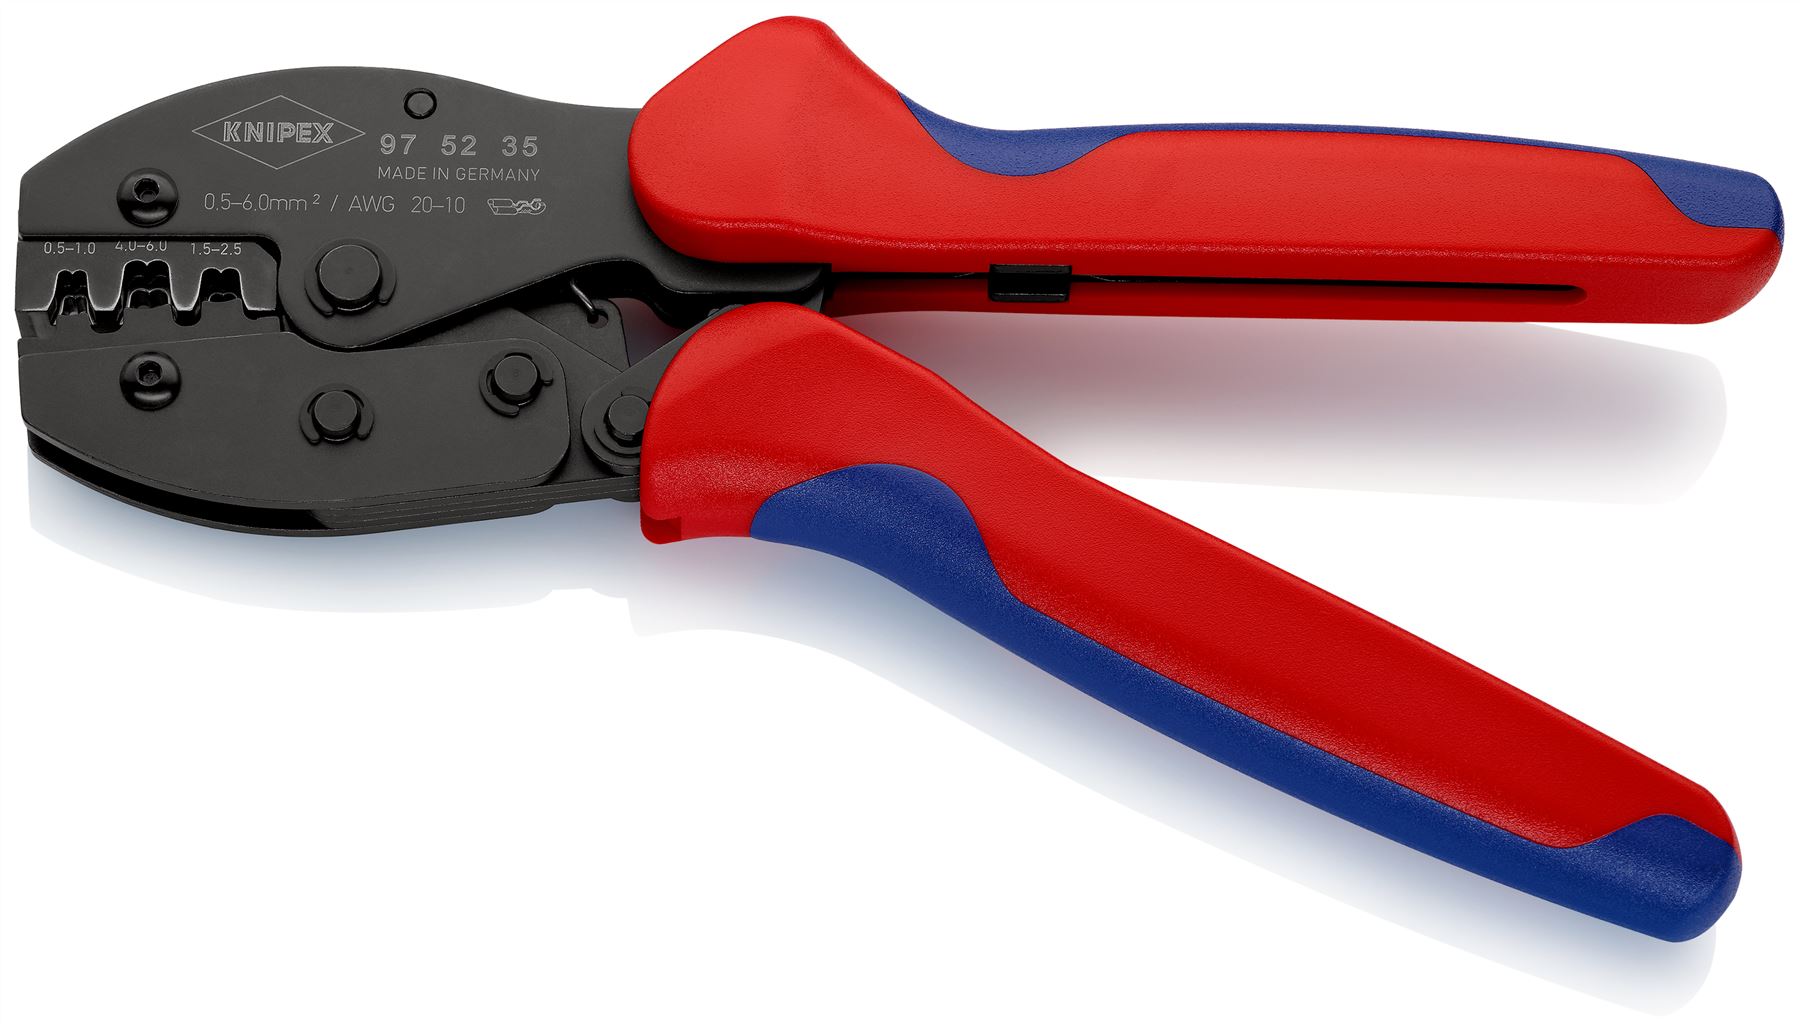 KNIPEX PreciForce Crimping Pliers for Non Insulated Open Plug Type Connectors Plug Width 4.8 + 6.3mm 220mm 97 52 35